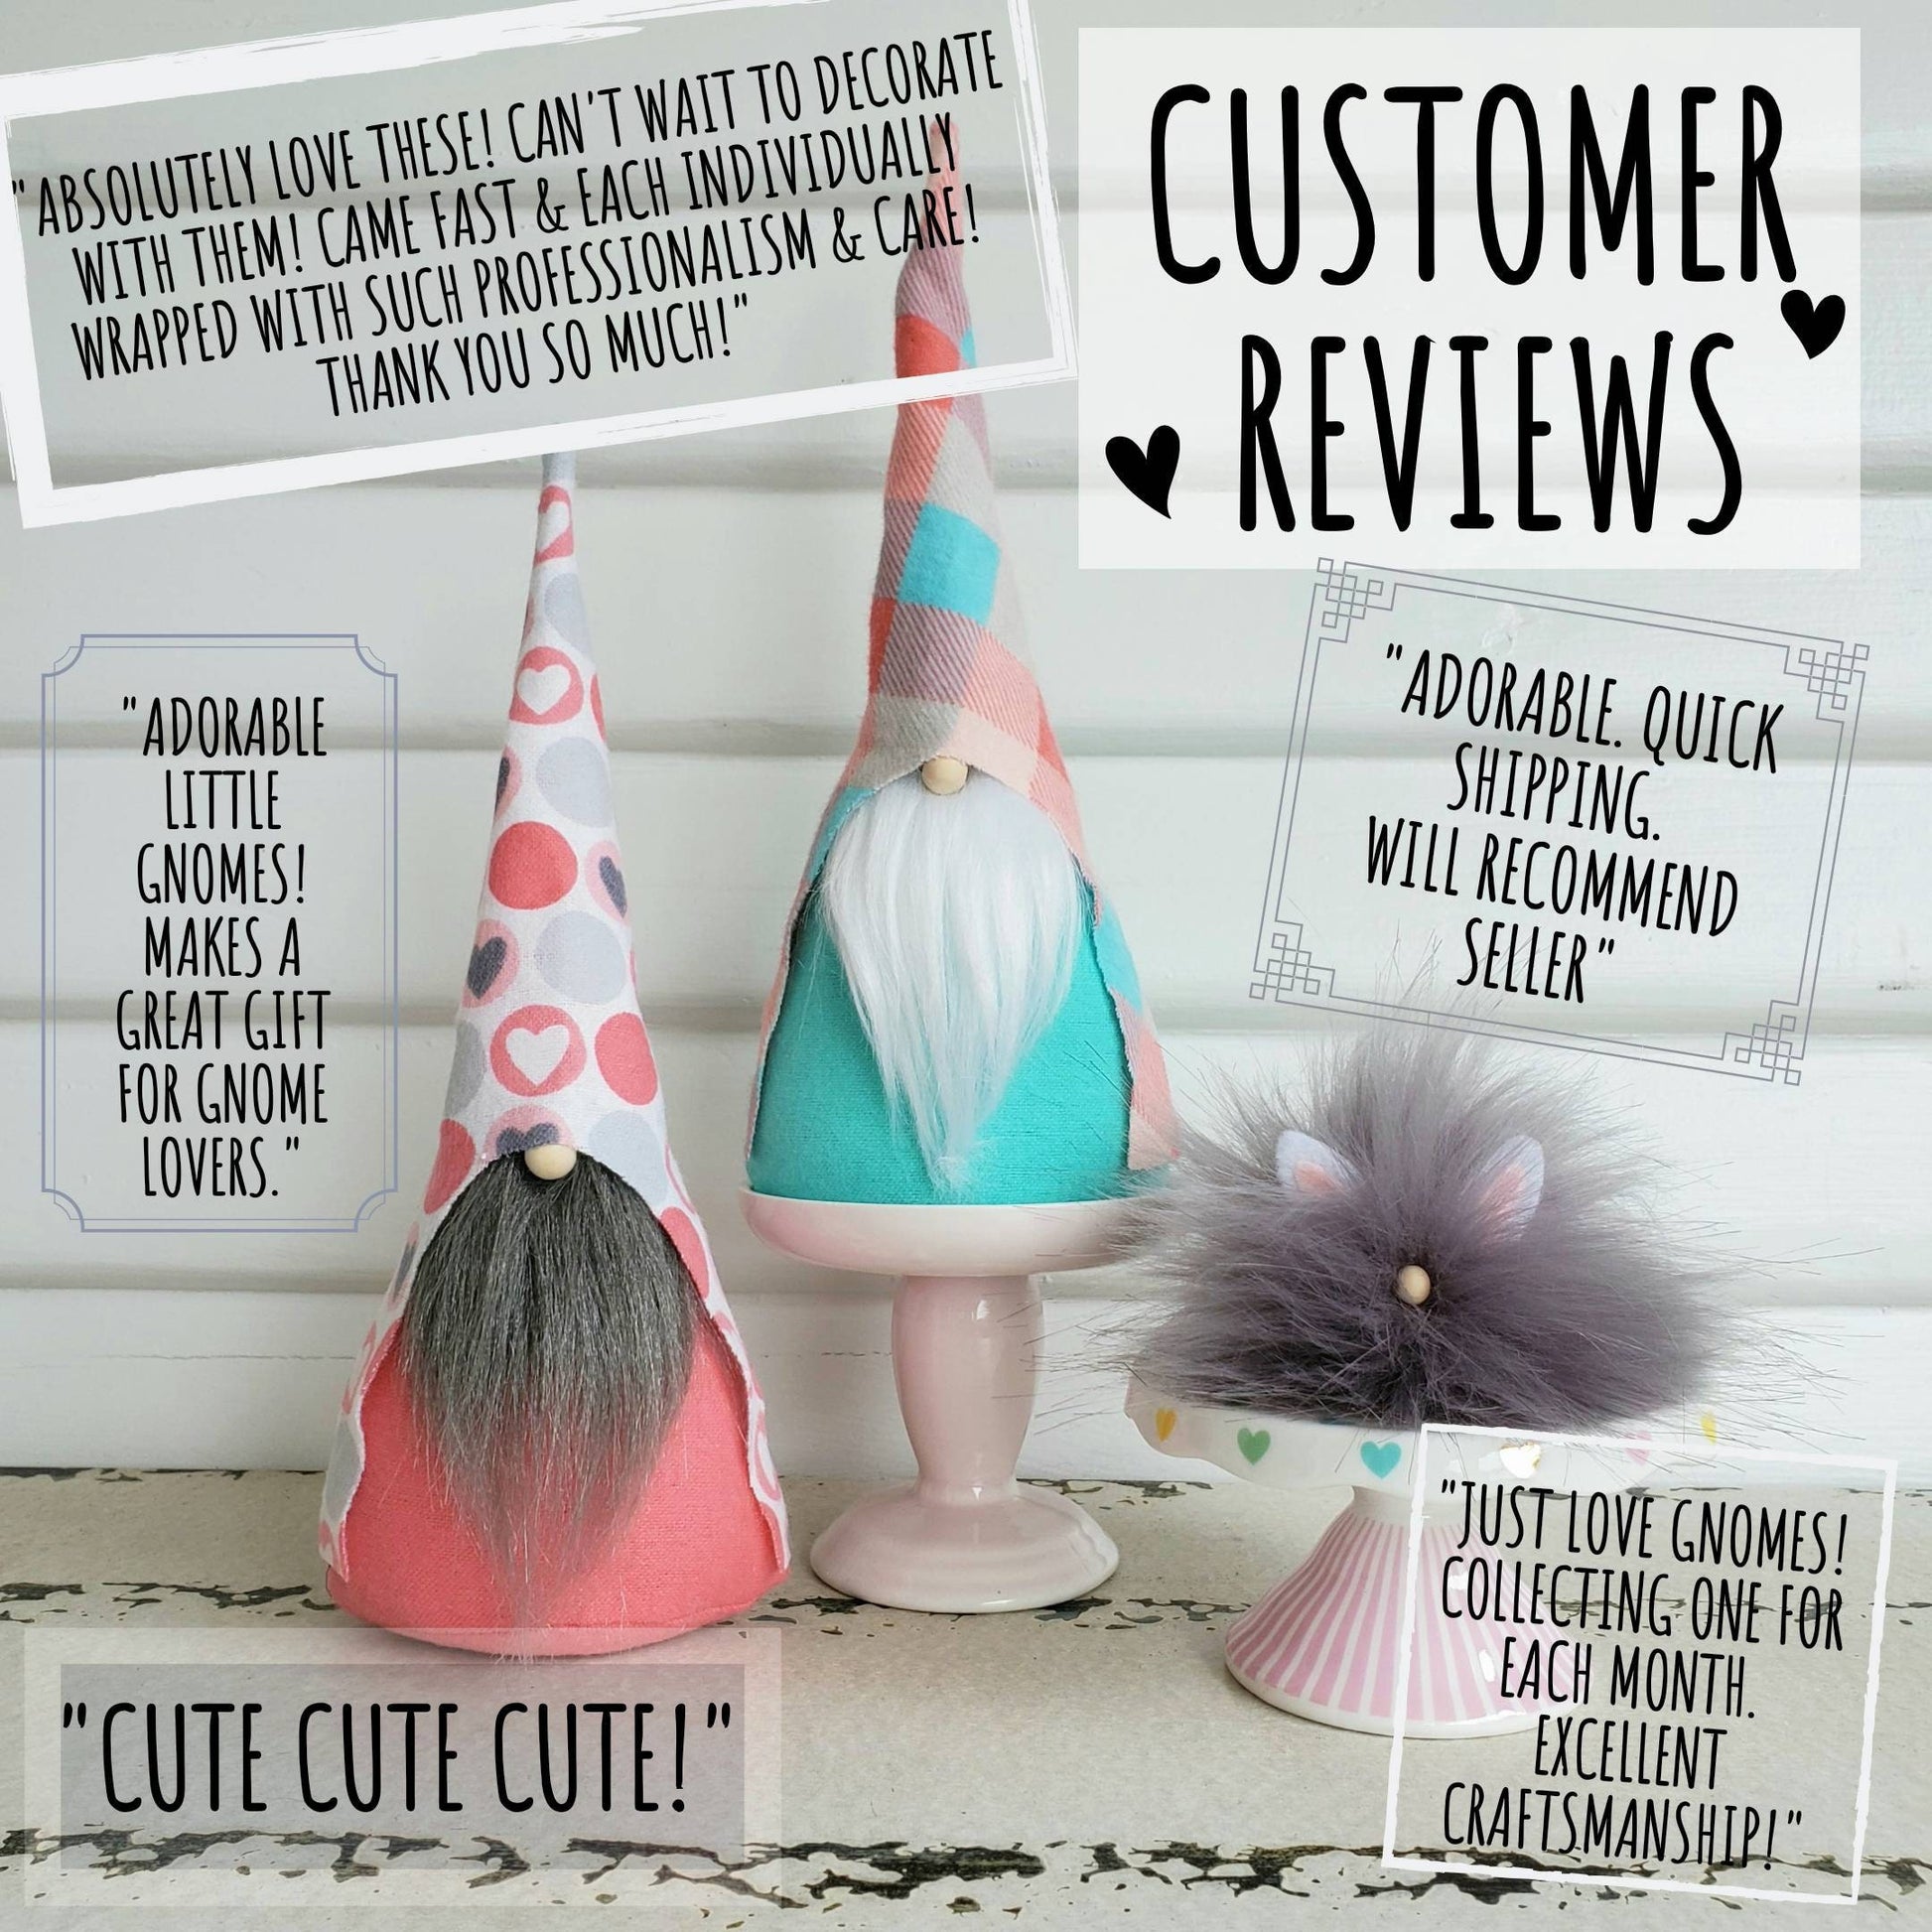 KyElle Kreations customer reviews for handmade Gnomes, displayed around 2 Spring Gnomes in Aqua and Coral colors, as well as a gray Gnome pet. 